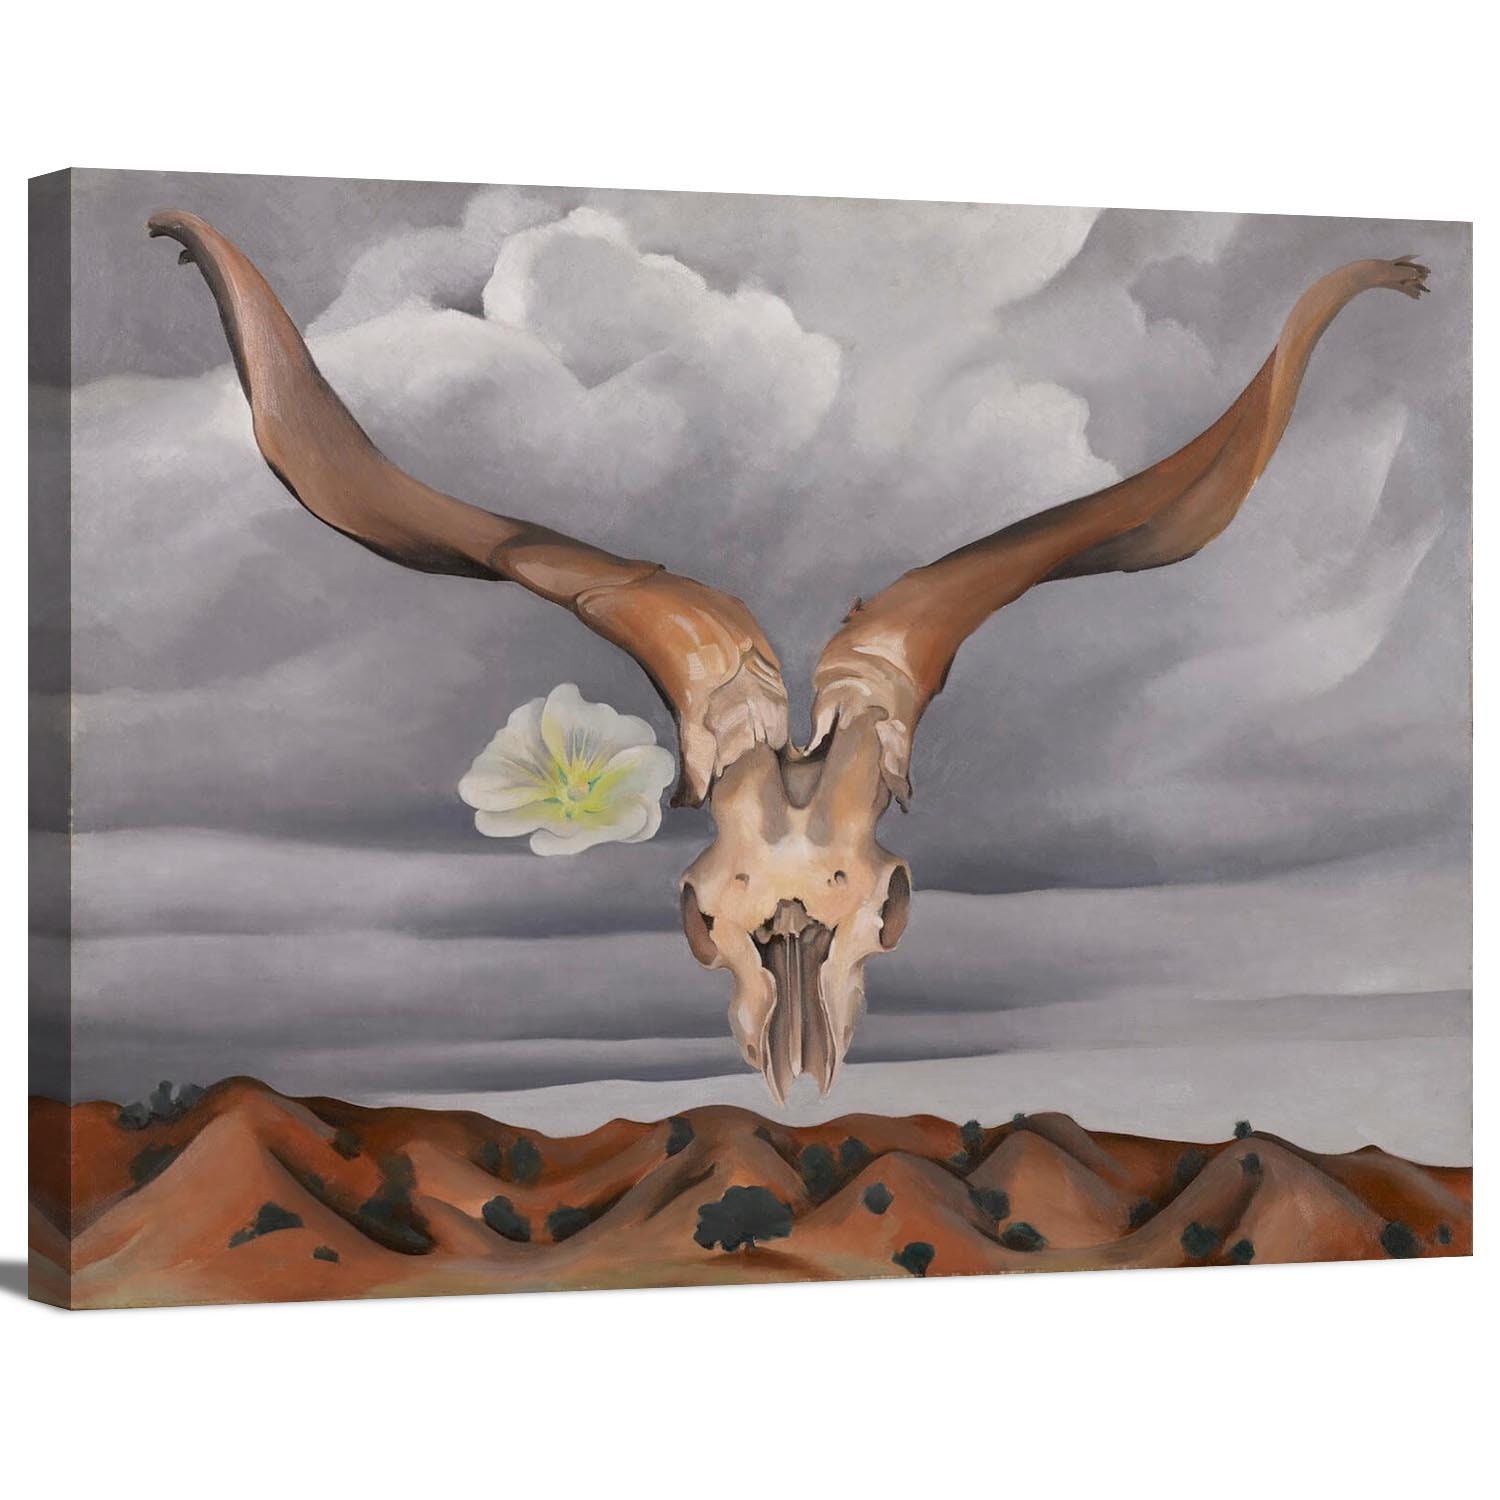 Ram's Head, White Hollyhock-Hills By Georgia O'keeffe Classic Fine Art Wrapped Canvas Wall Office Decor Home Decoration